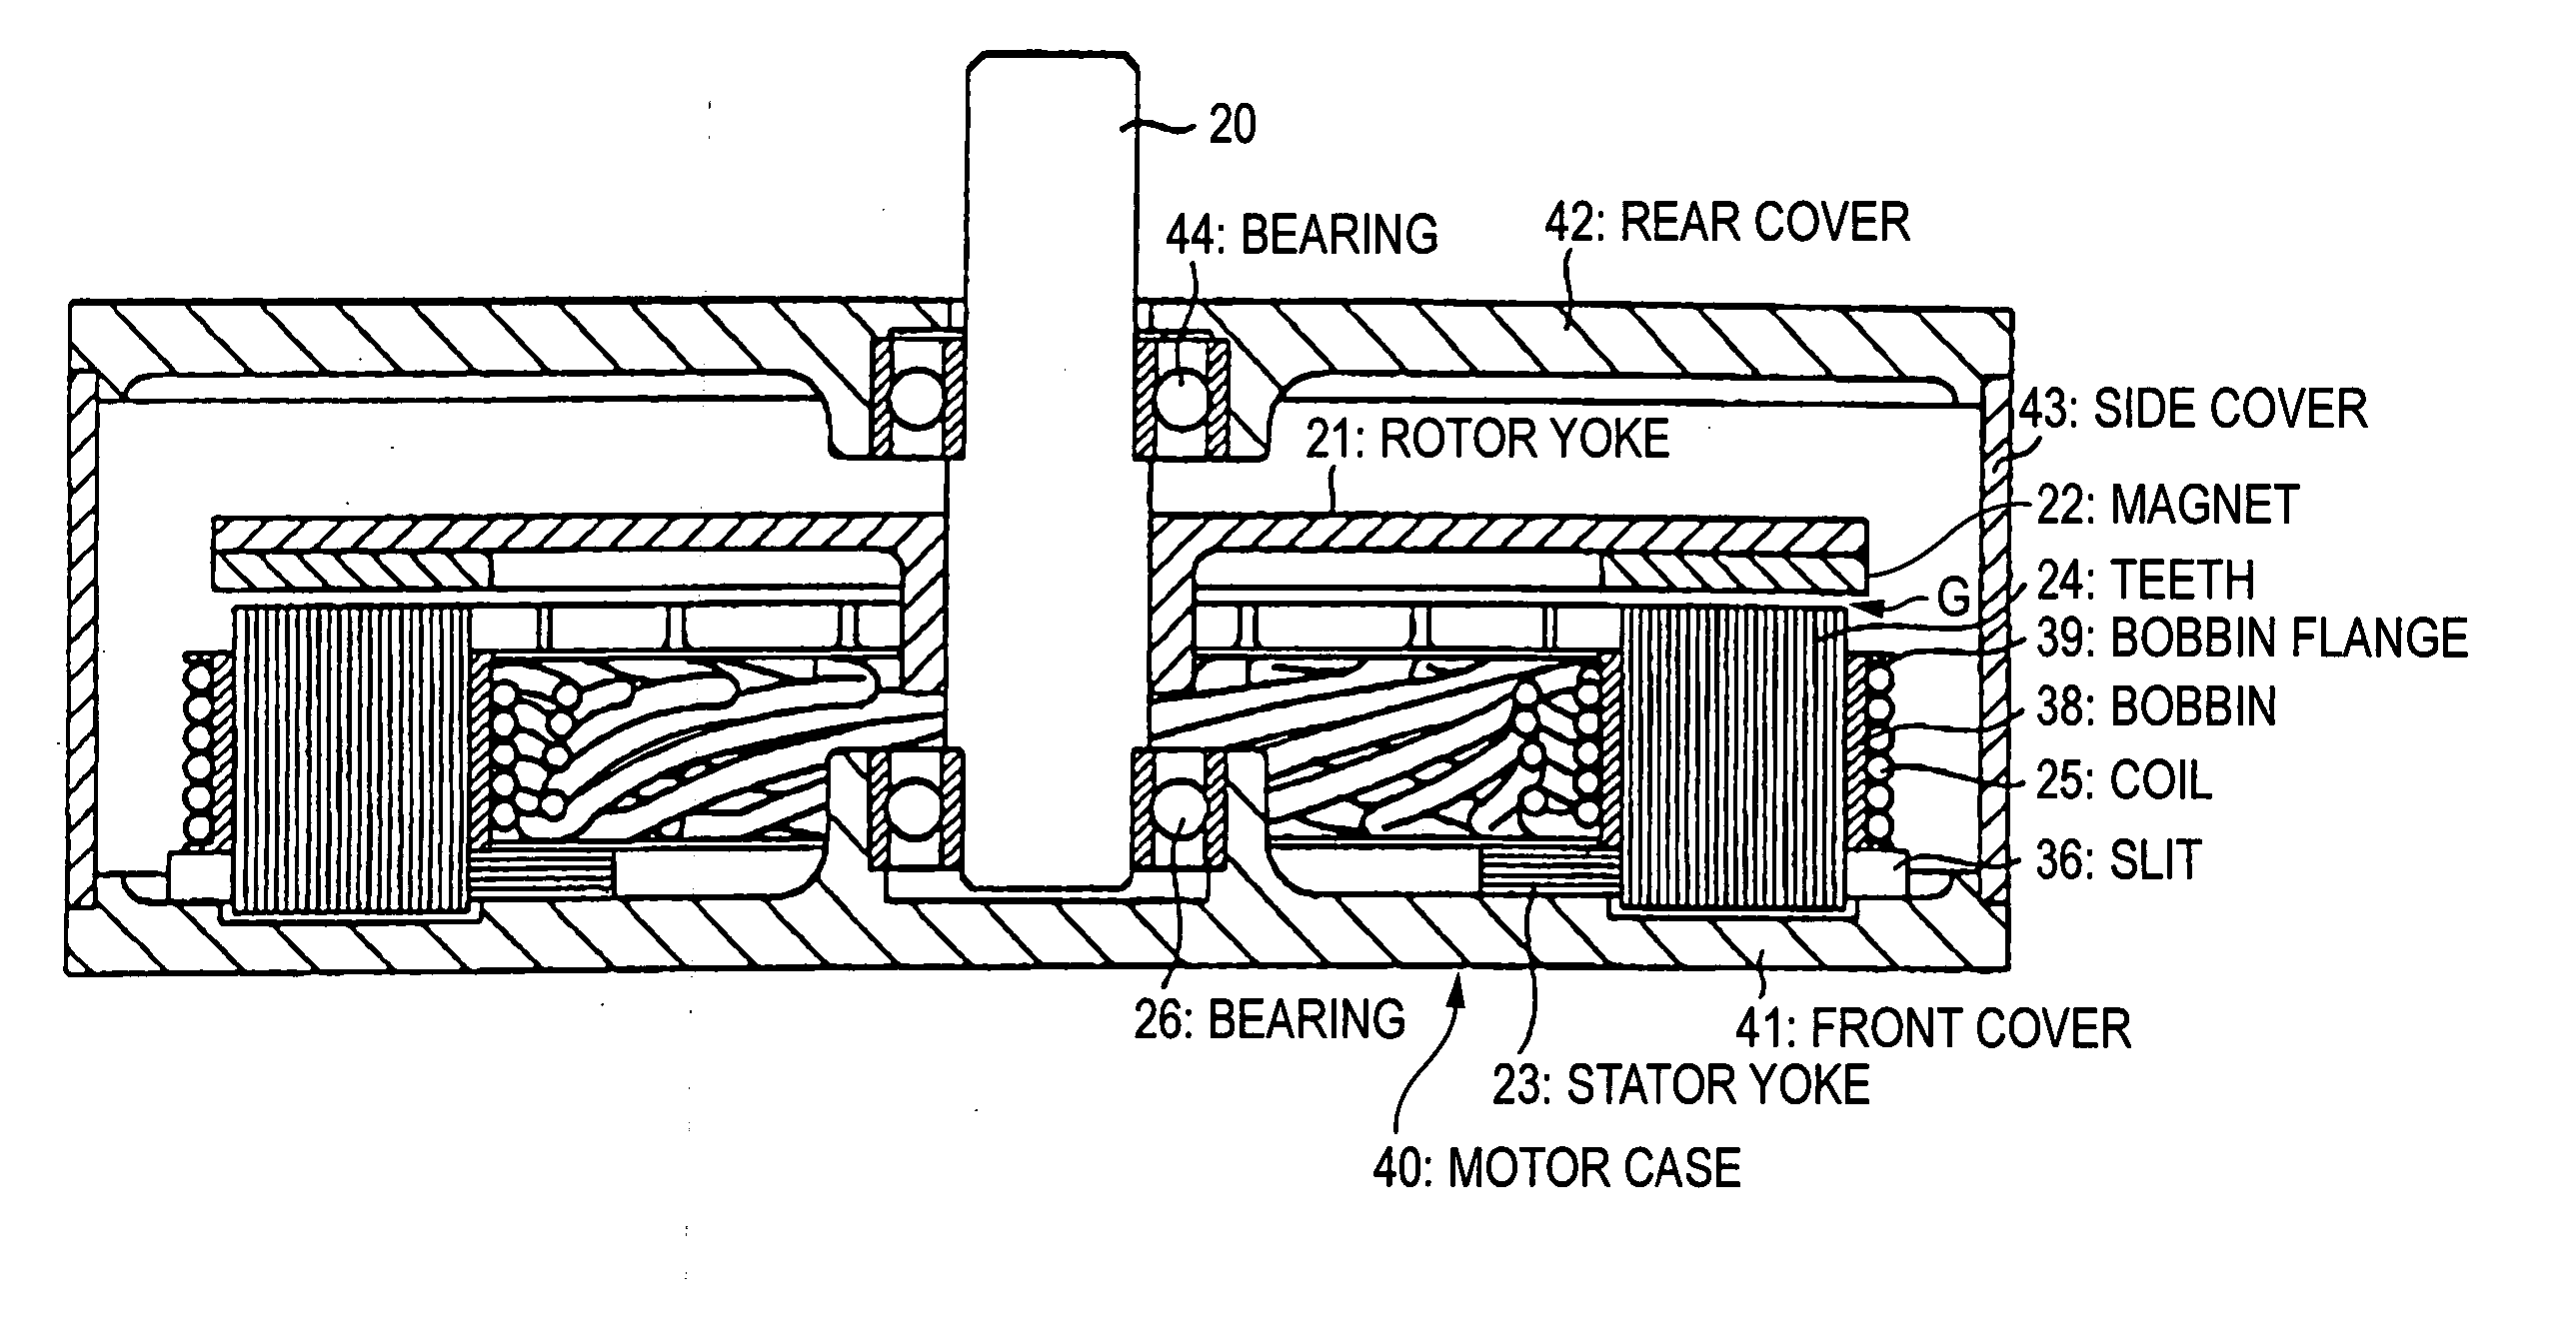 Axial gap type rotating electric machine